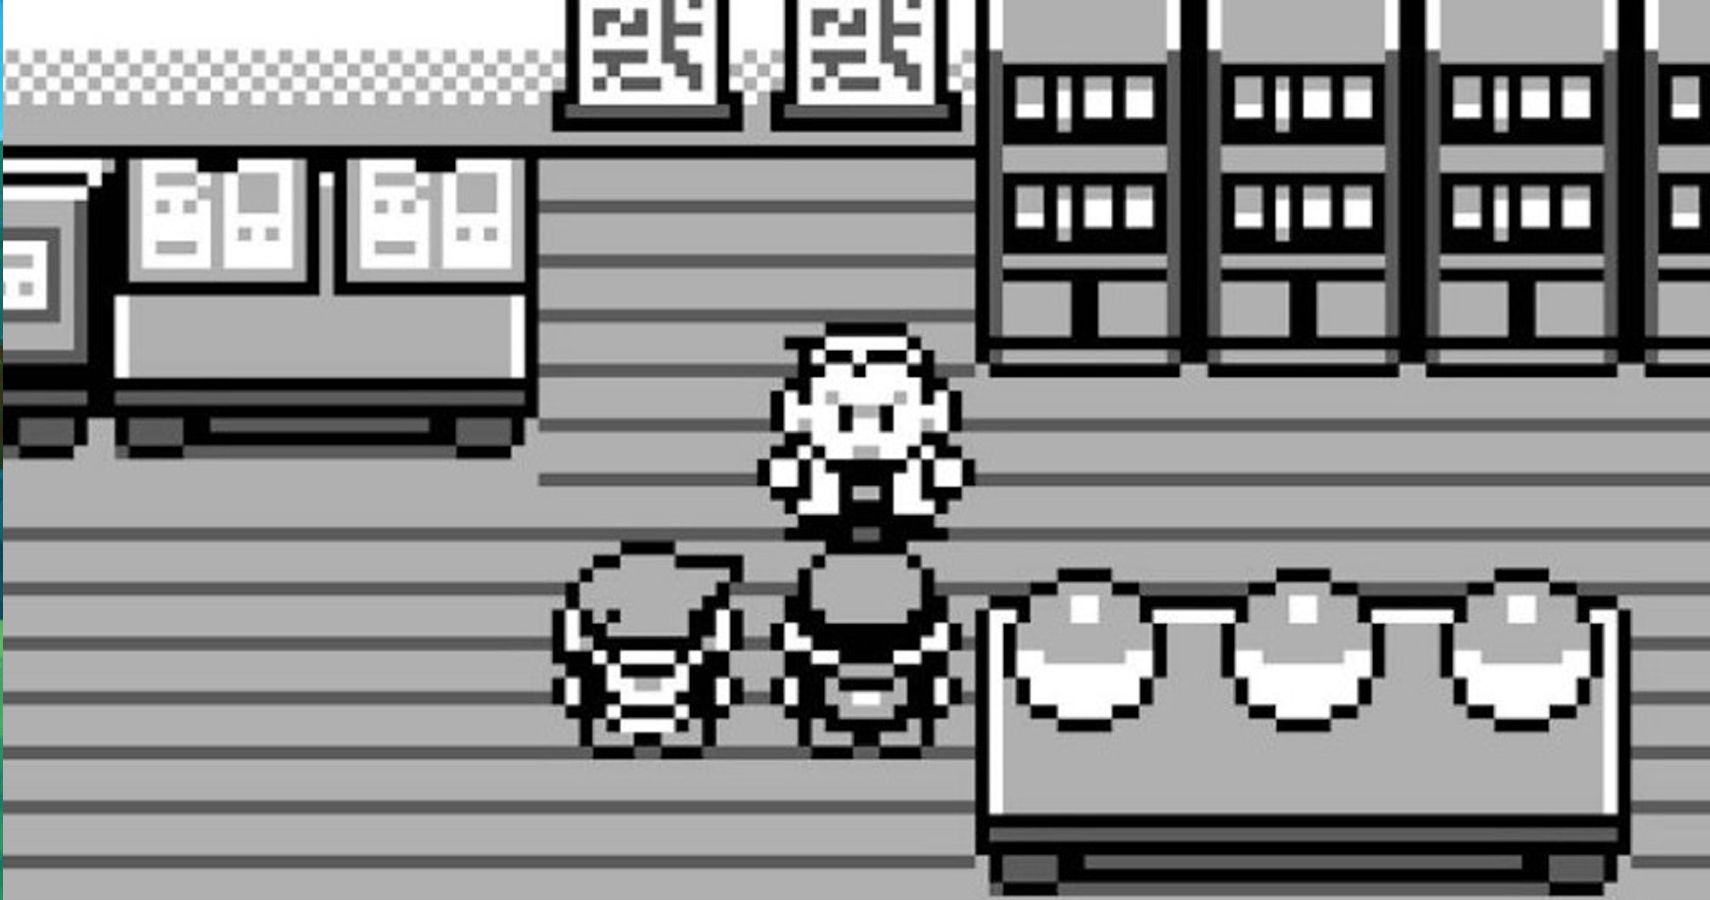 How to Catch Missingno. in Pokémon Red and Blue: 6 Steps